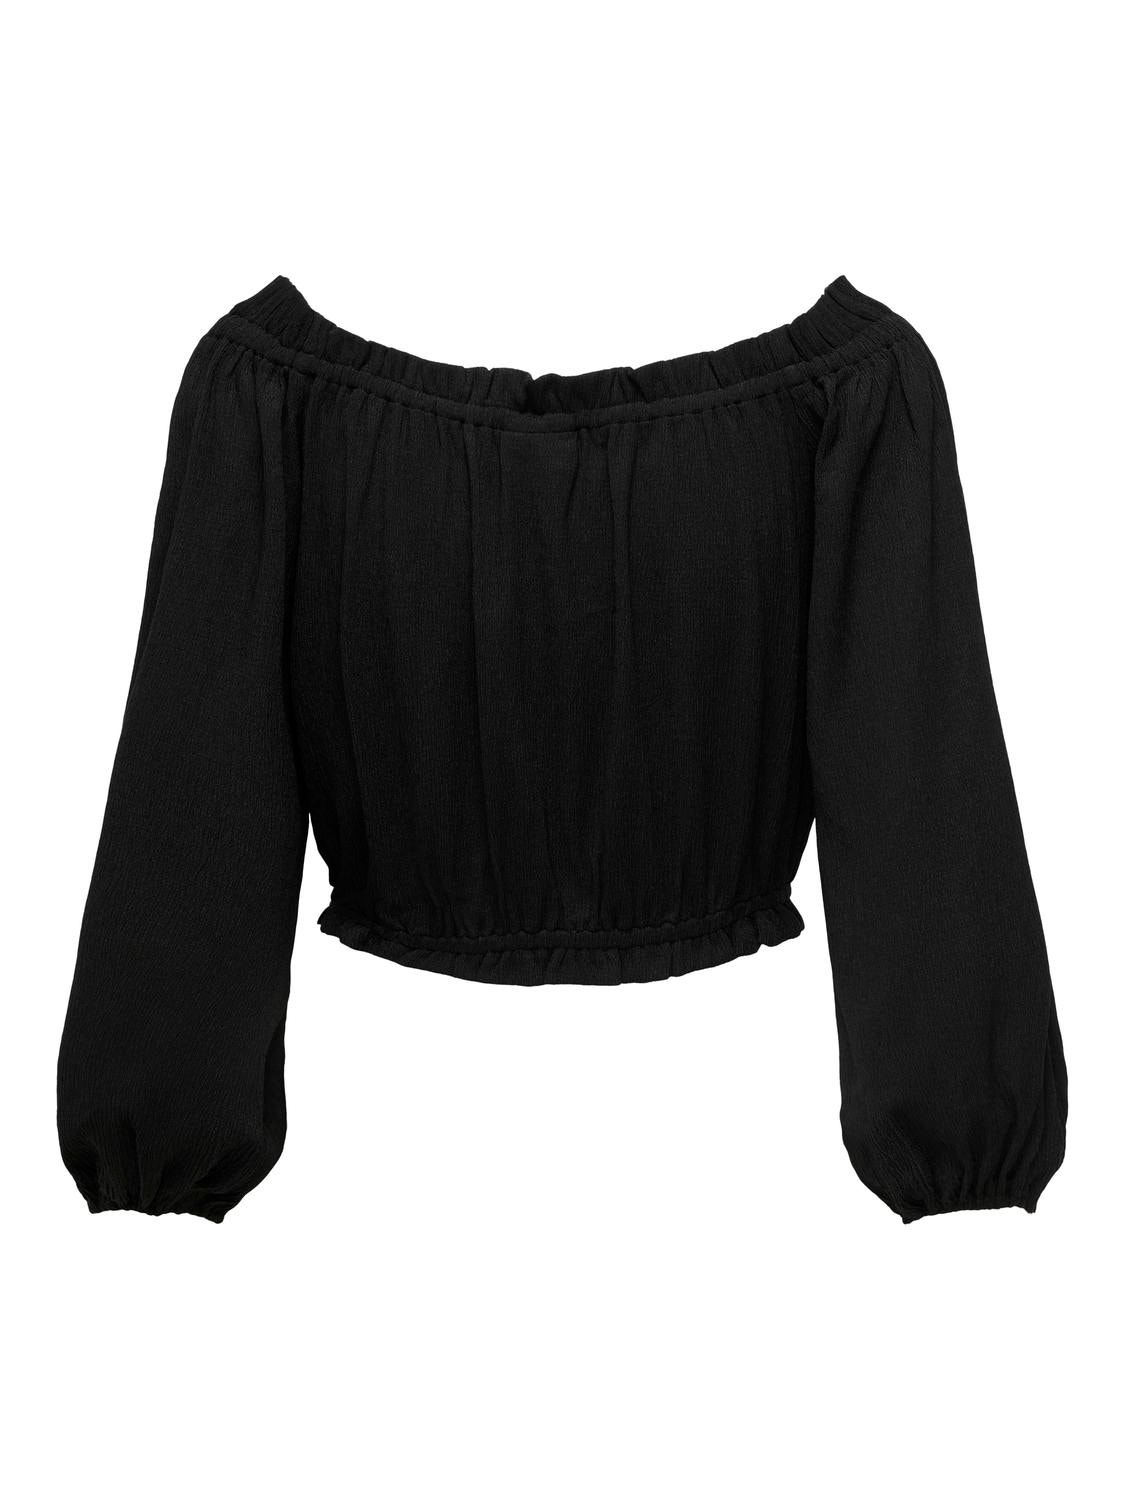 ONLY O-hals cropped top  -Black - 15290247